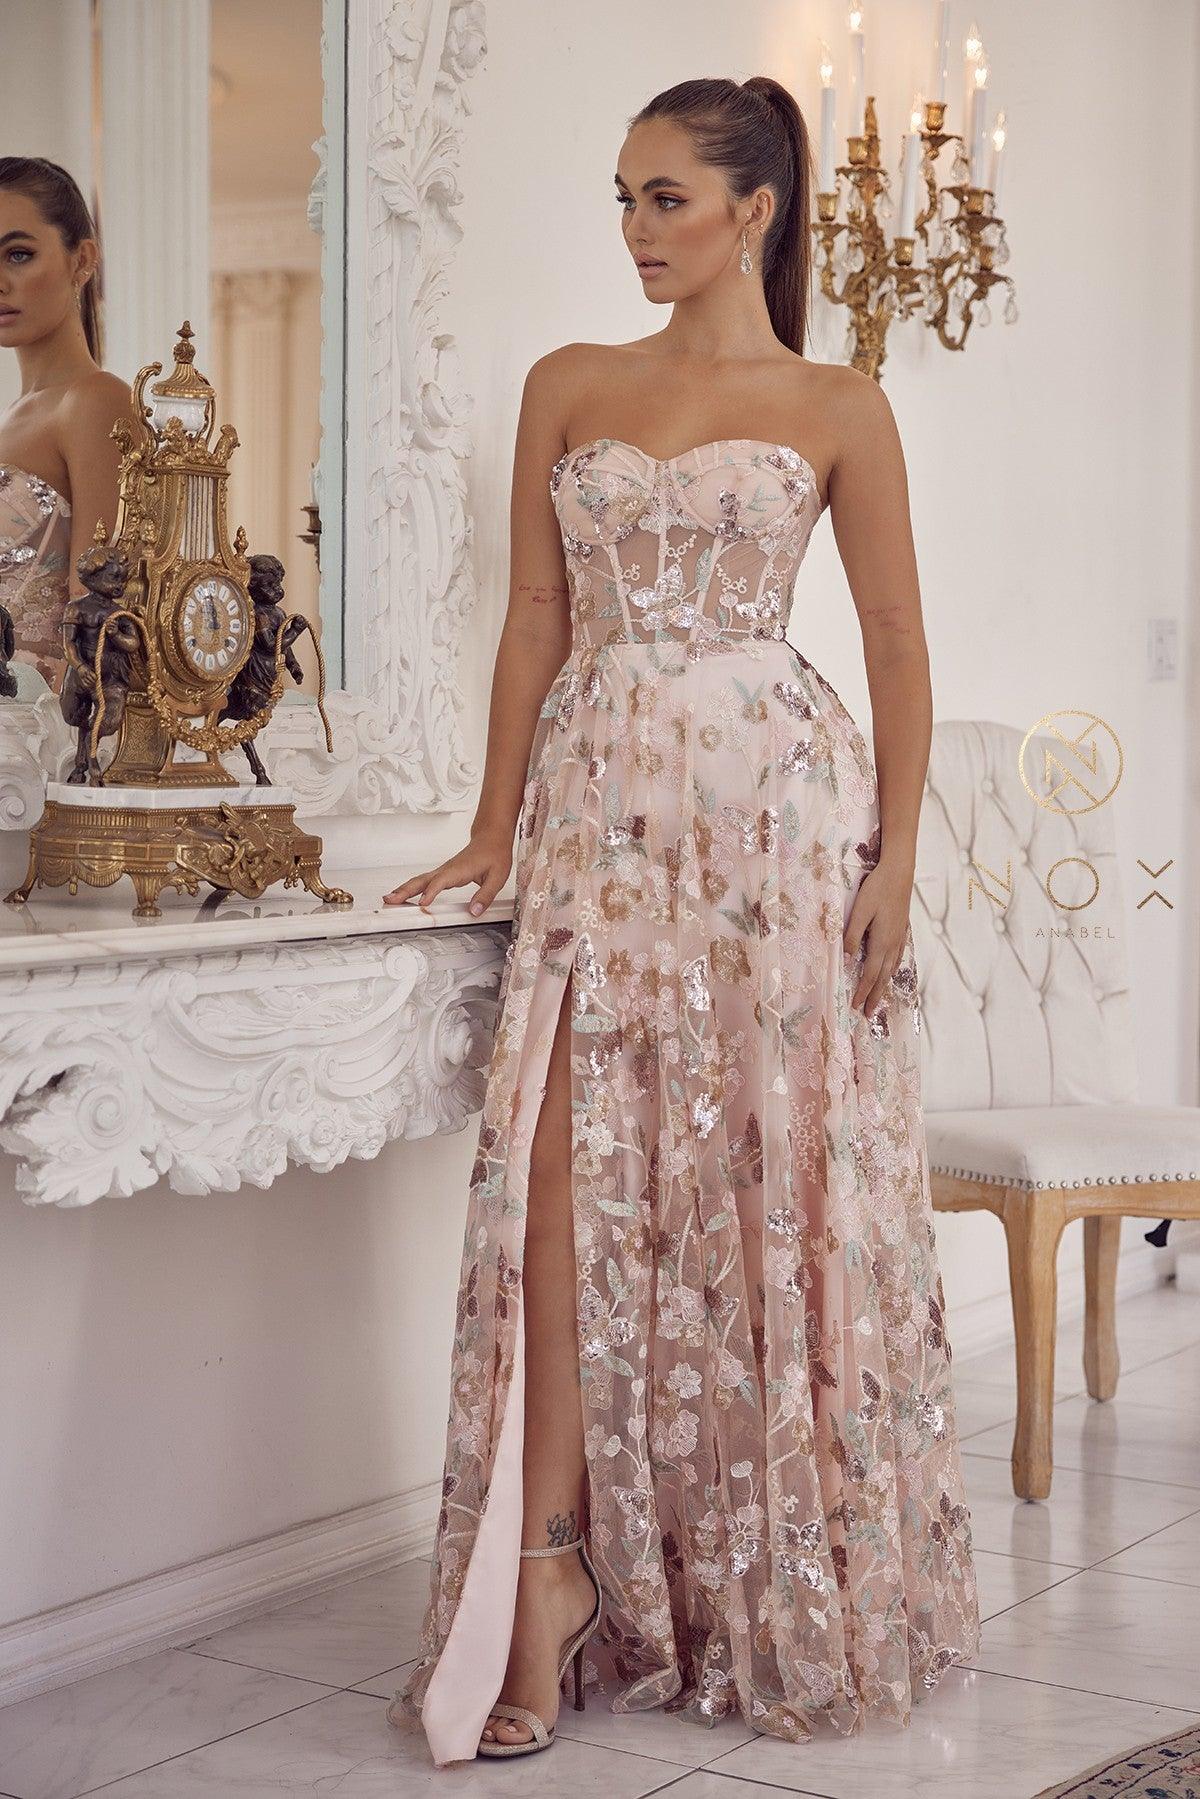 Strapless Sexy Long Prom Dress - The Dress Outlet